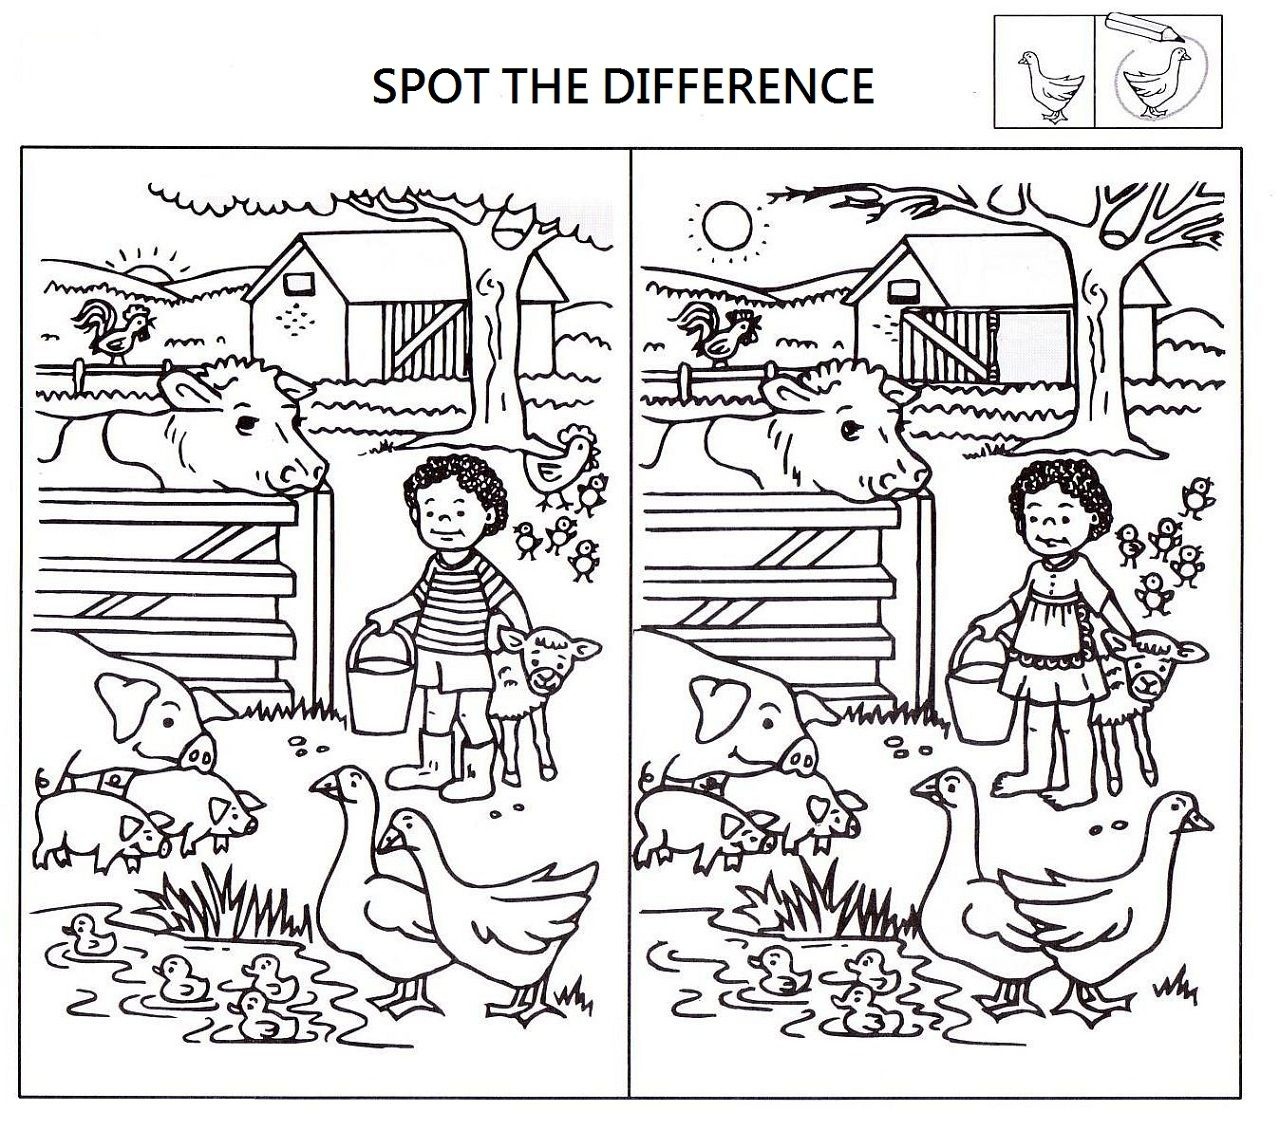 Spot The Difference Worksheets For Kids | Kids Worksheets Printable - Free Printable Spot The Difference Games For Adults